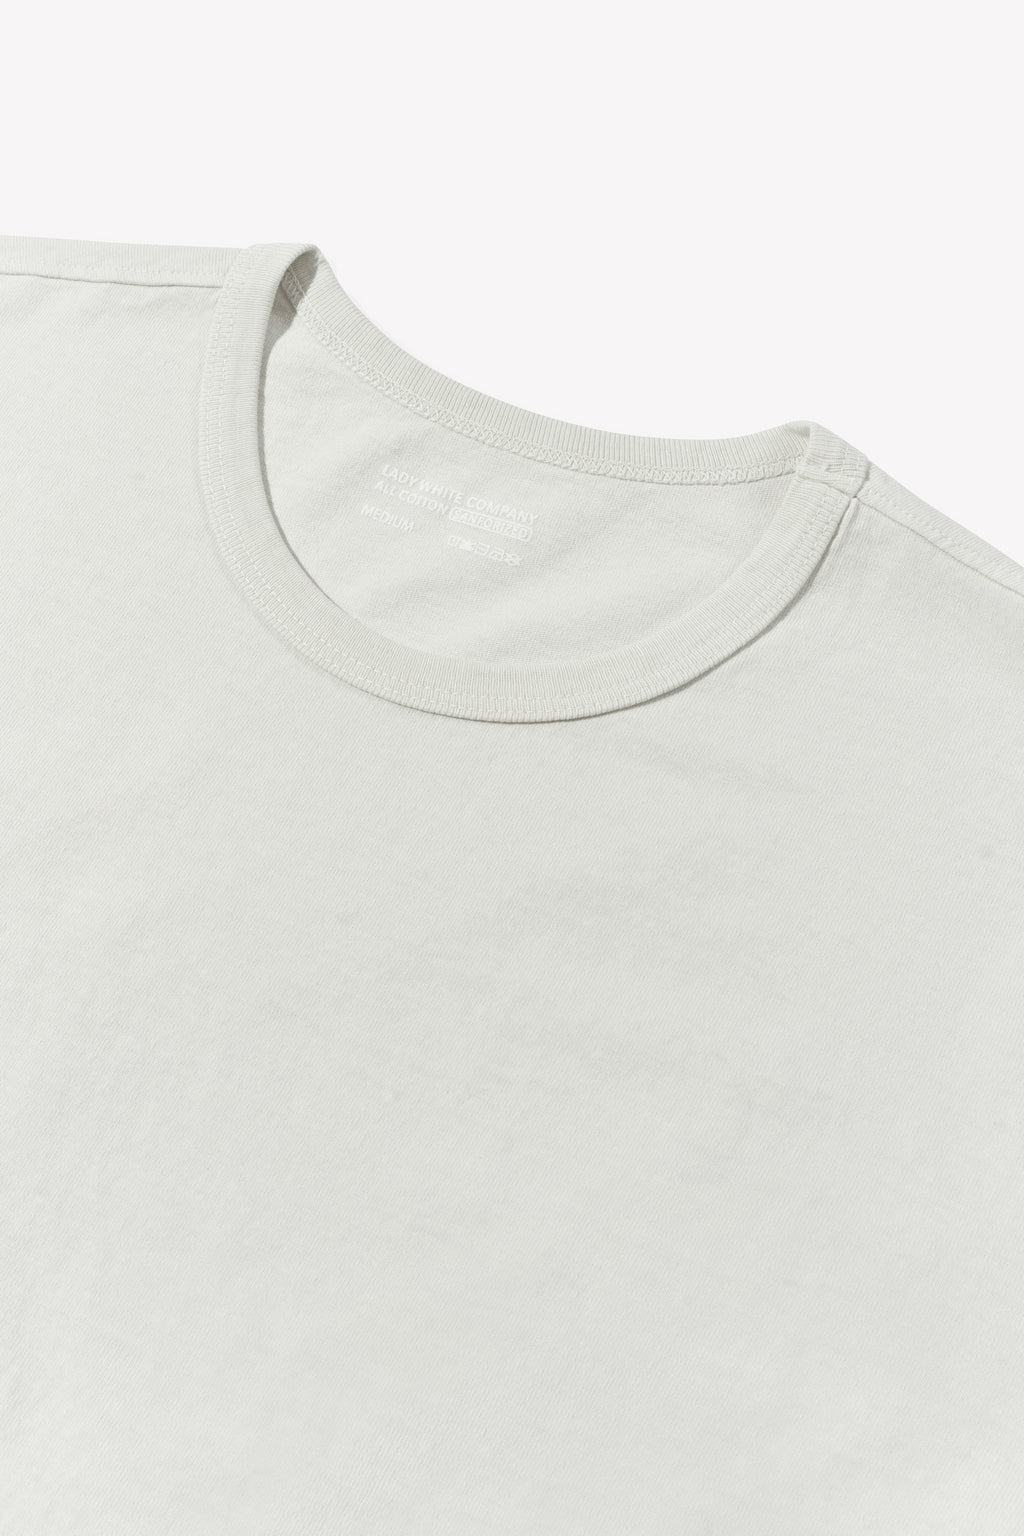 - OUR OFF LADY WHITE WHITE – T-SHIRT